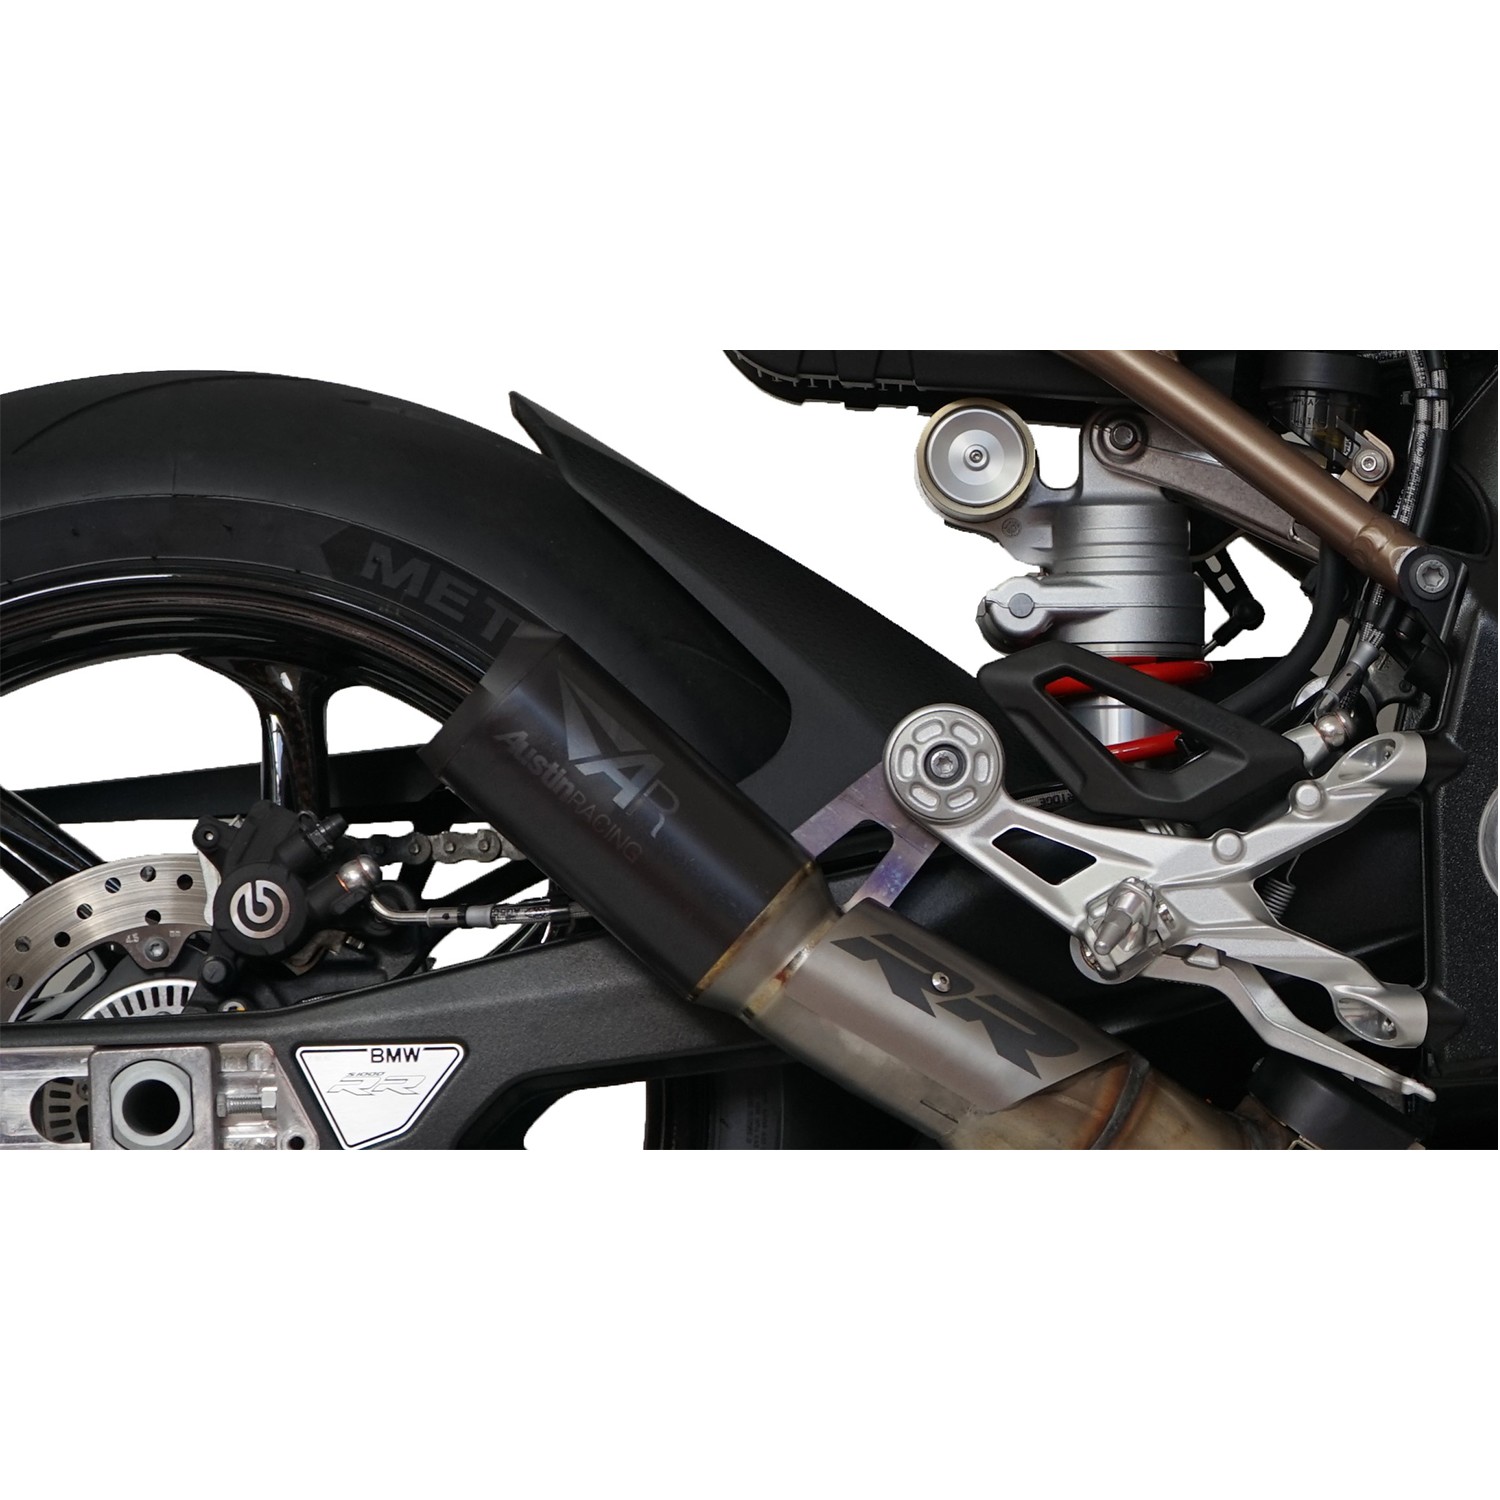 2019 - 2021 S1000RR EU HOMOLOGATED SLIP-ON EXHAUST SYSTEM